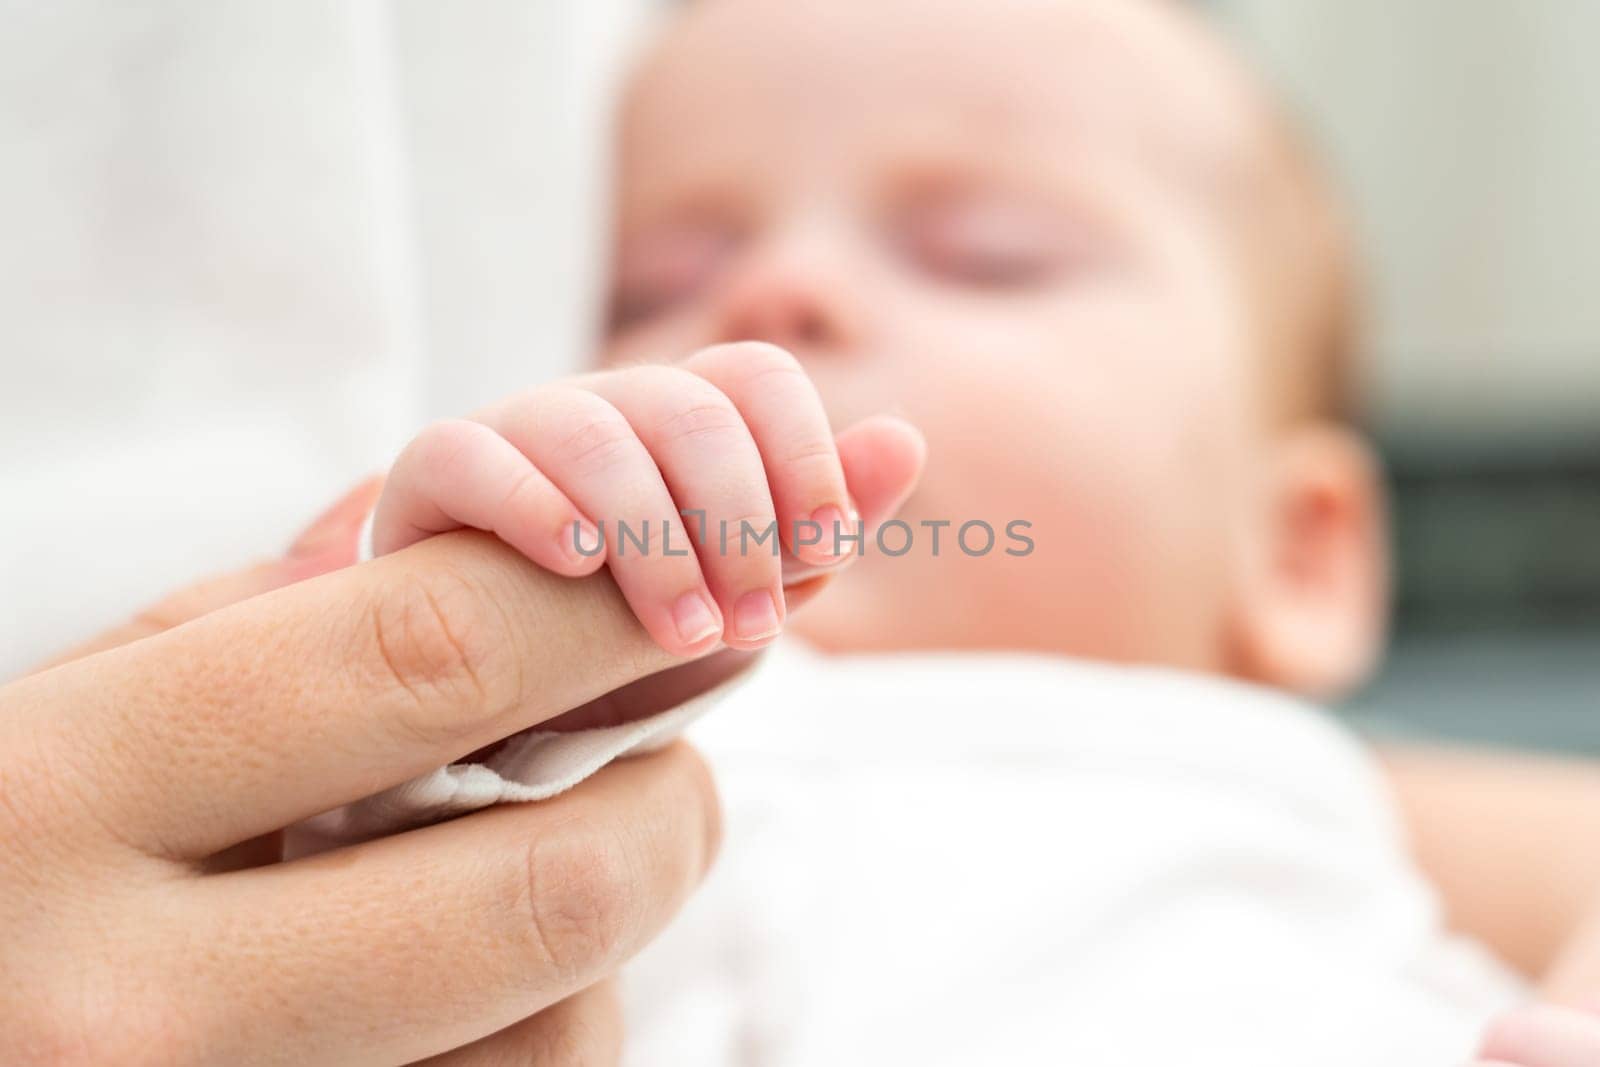 Newborn's gesture tells tales of trust. Concept of the deep connection in early moments by Mariakray